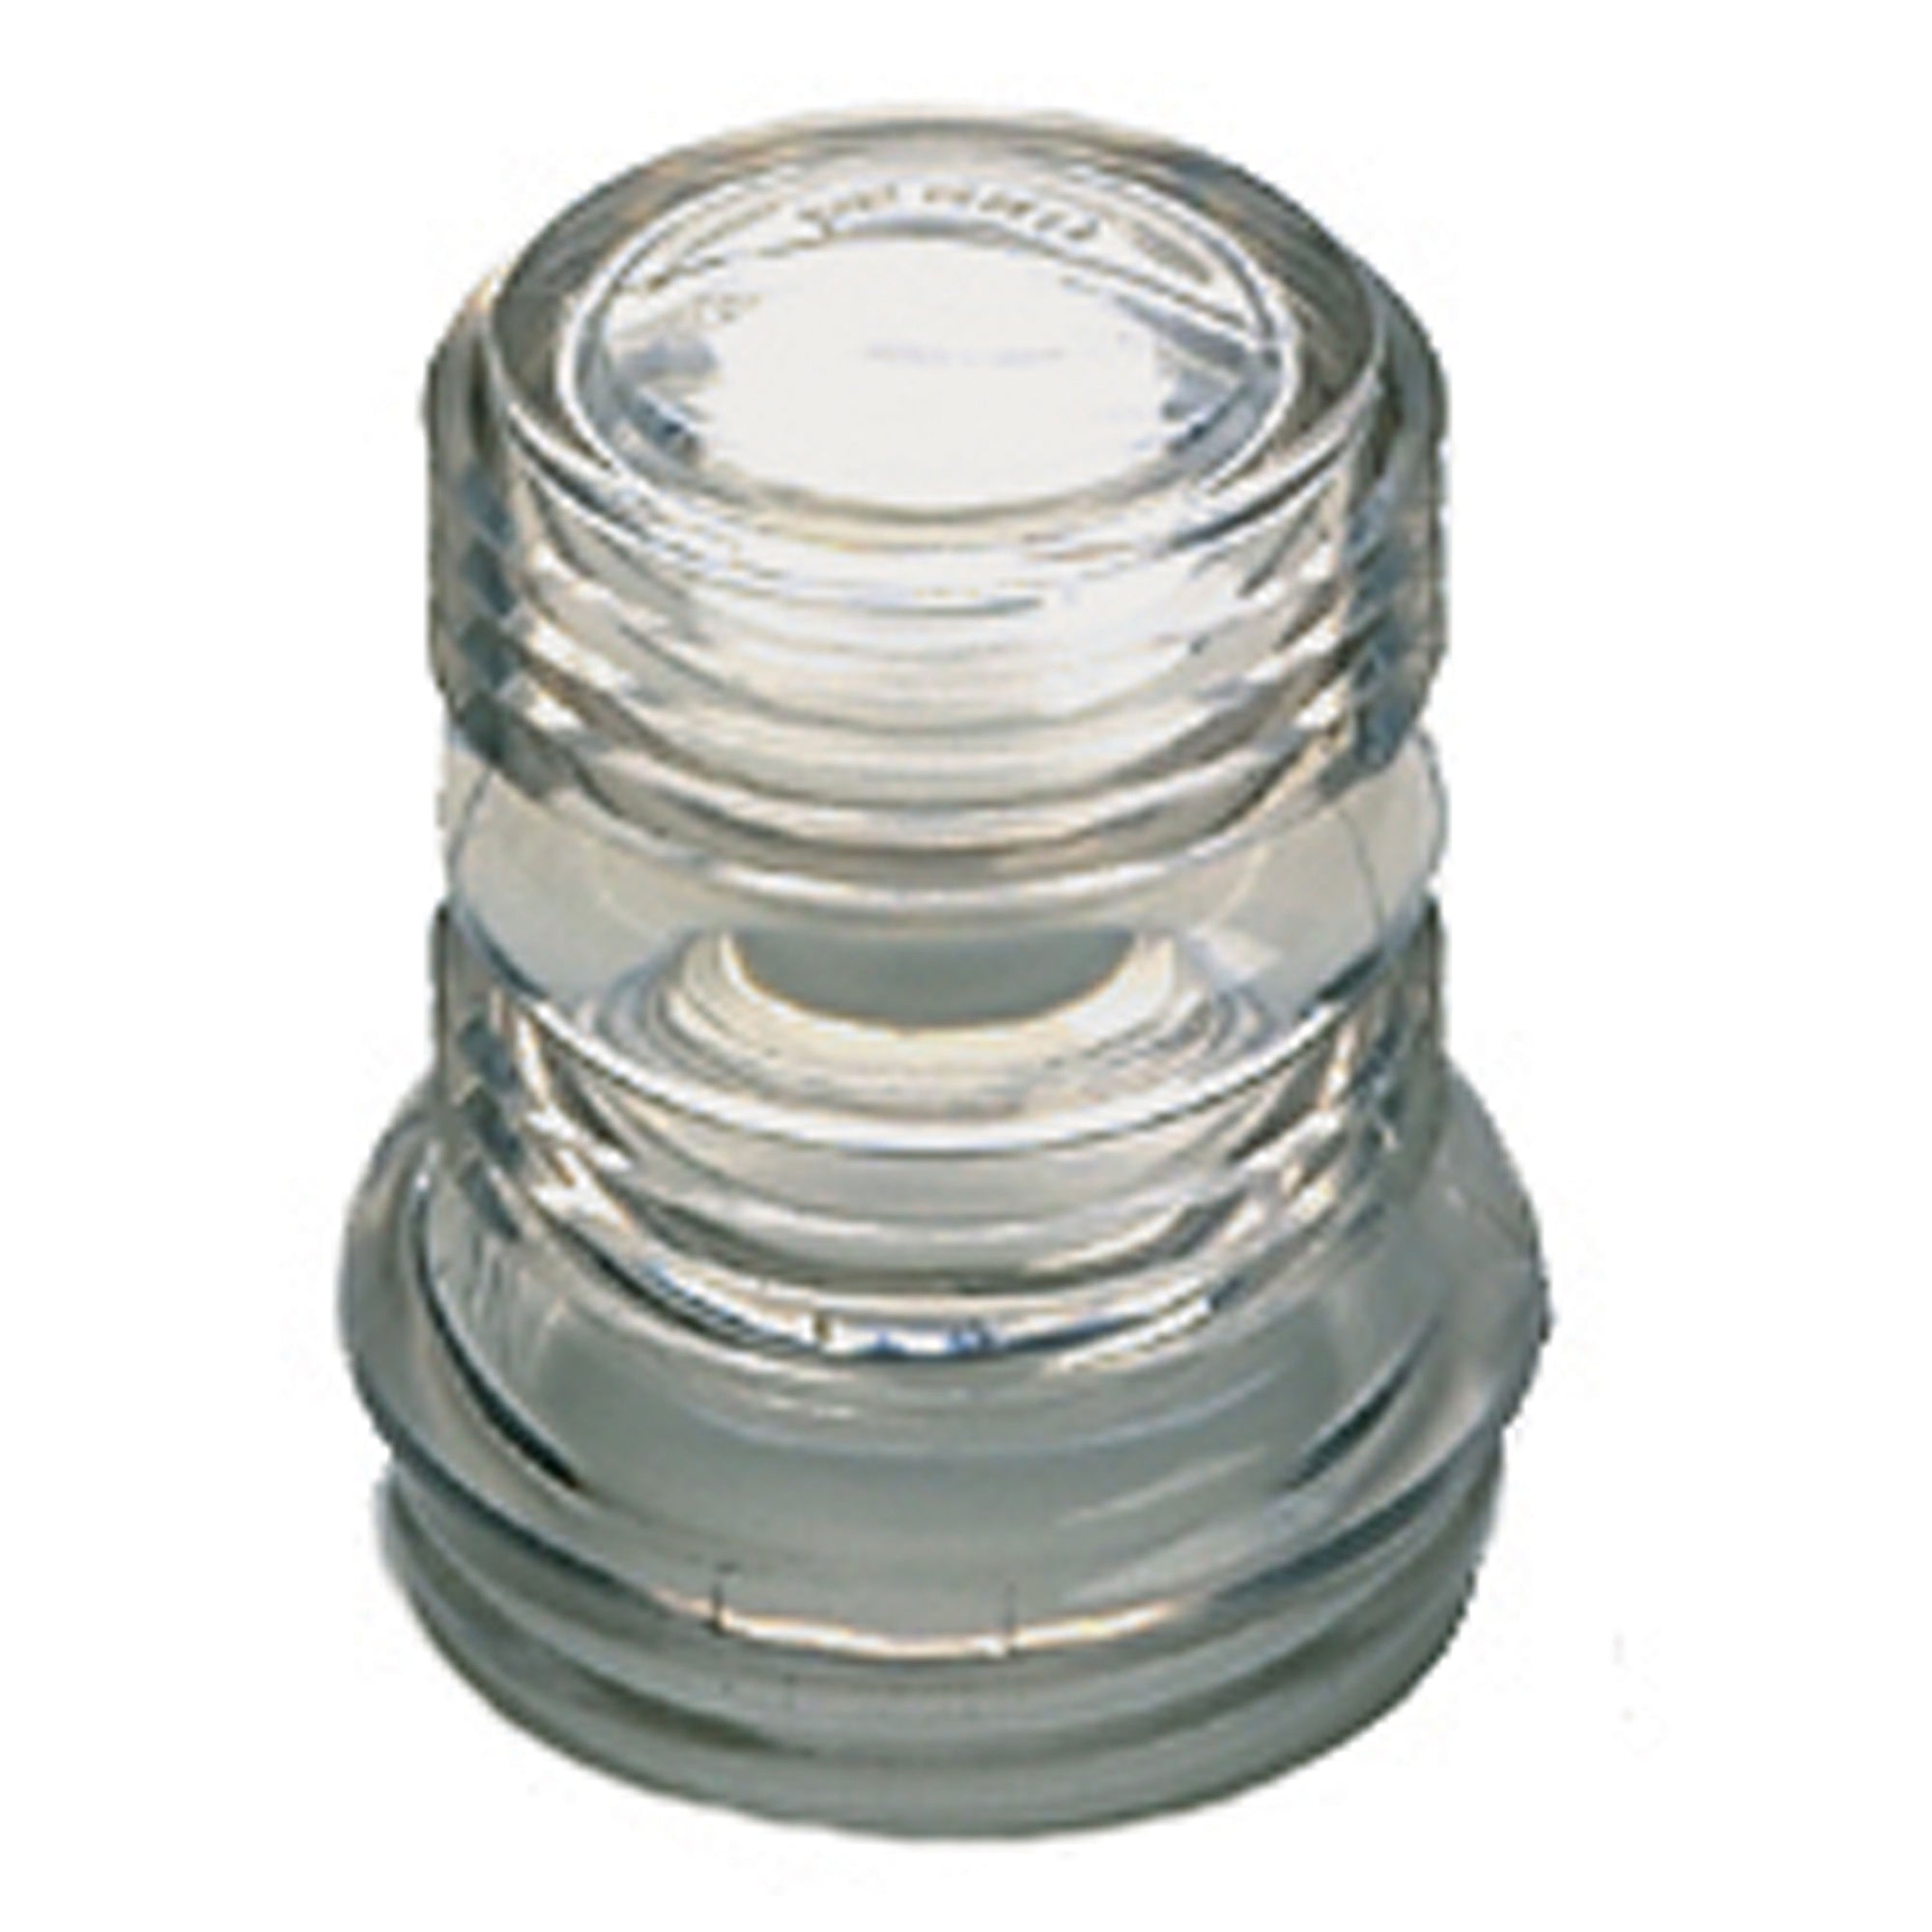 Perko 0248DP0CLR 360° Degree Lens for All-Round Lights - Clear